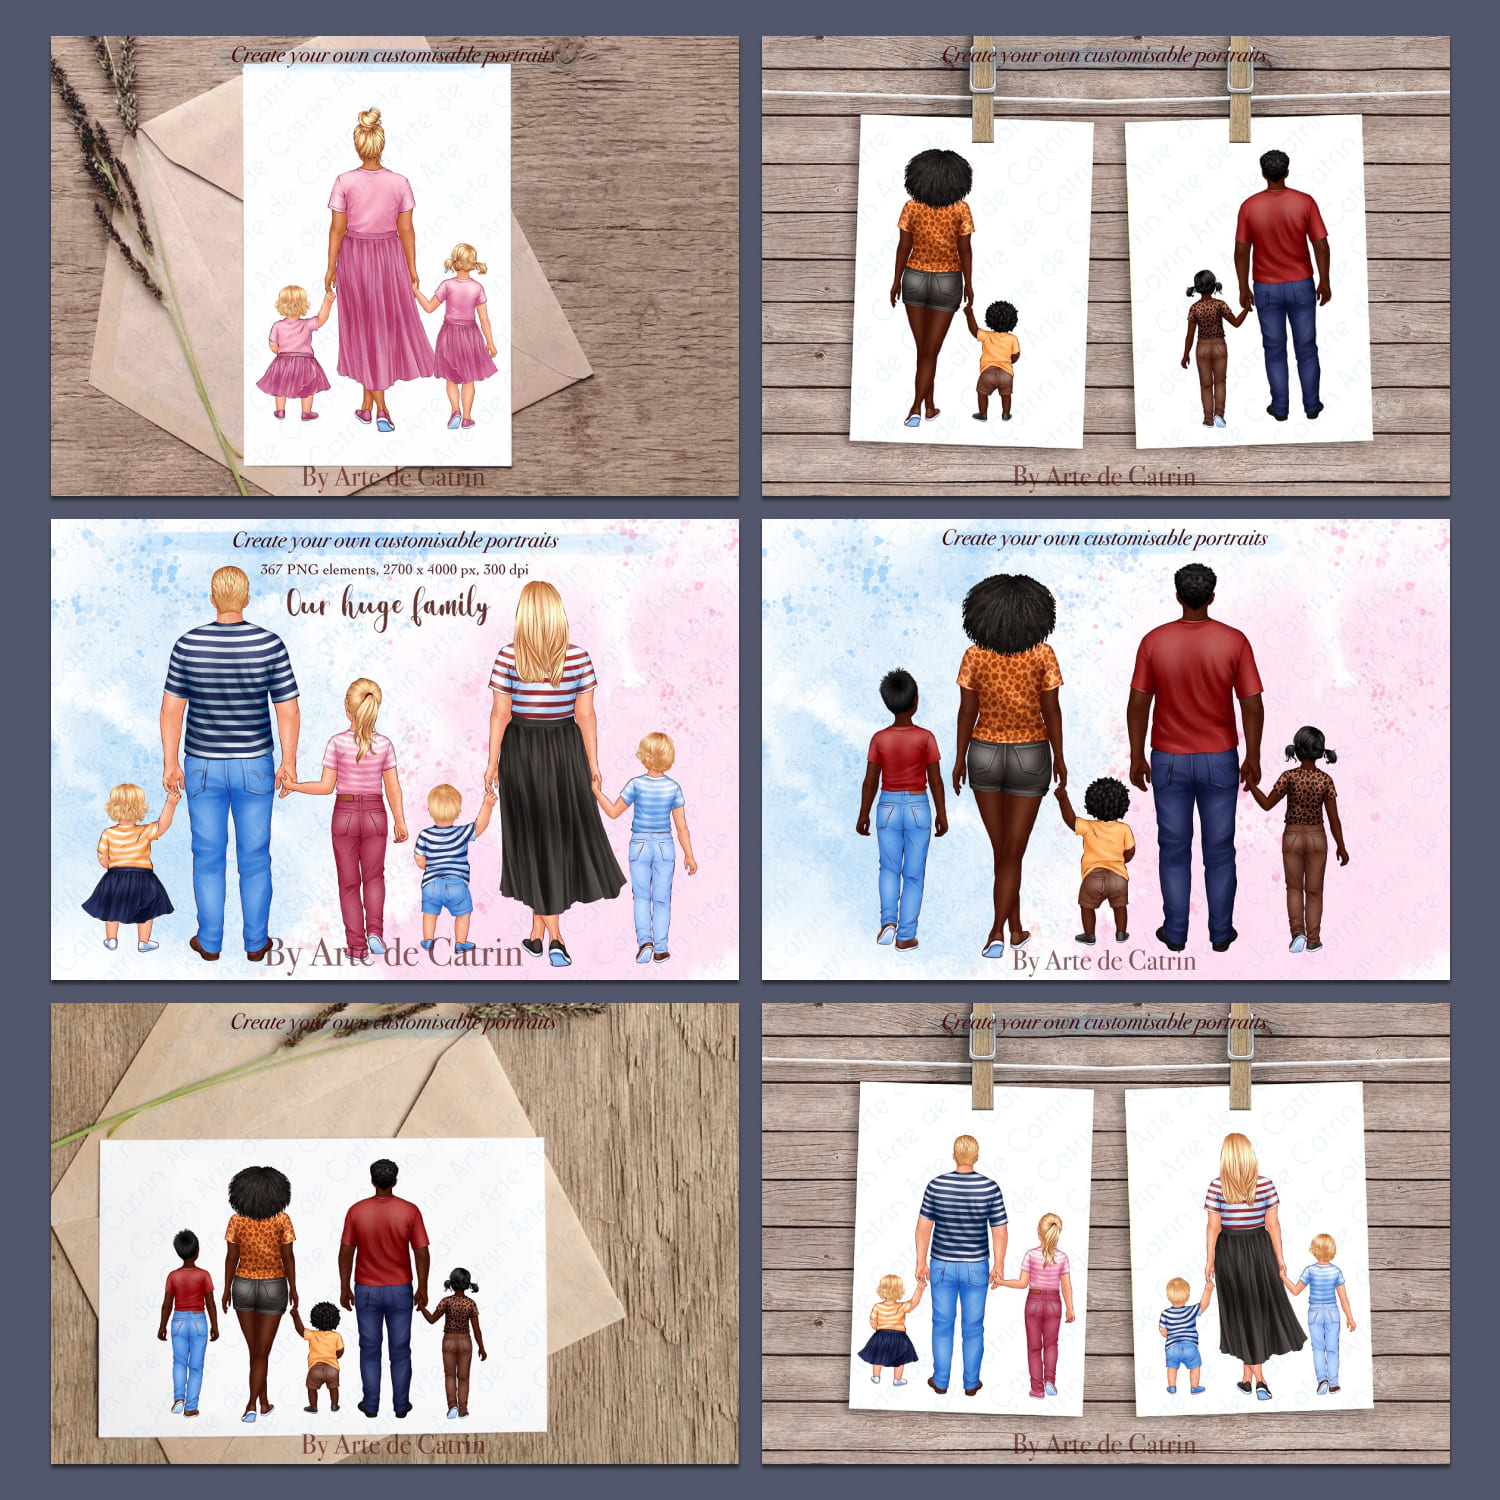 Our Huge Family Clipart, Parents created by ArtedeCatrin.